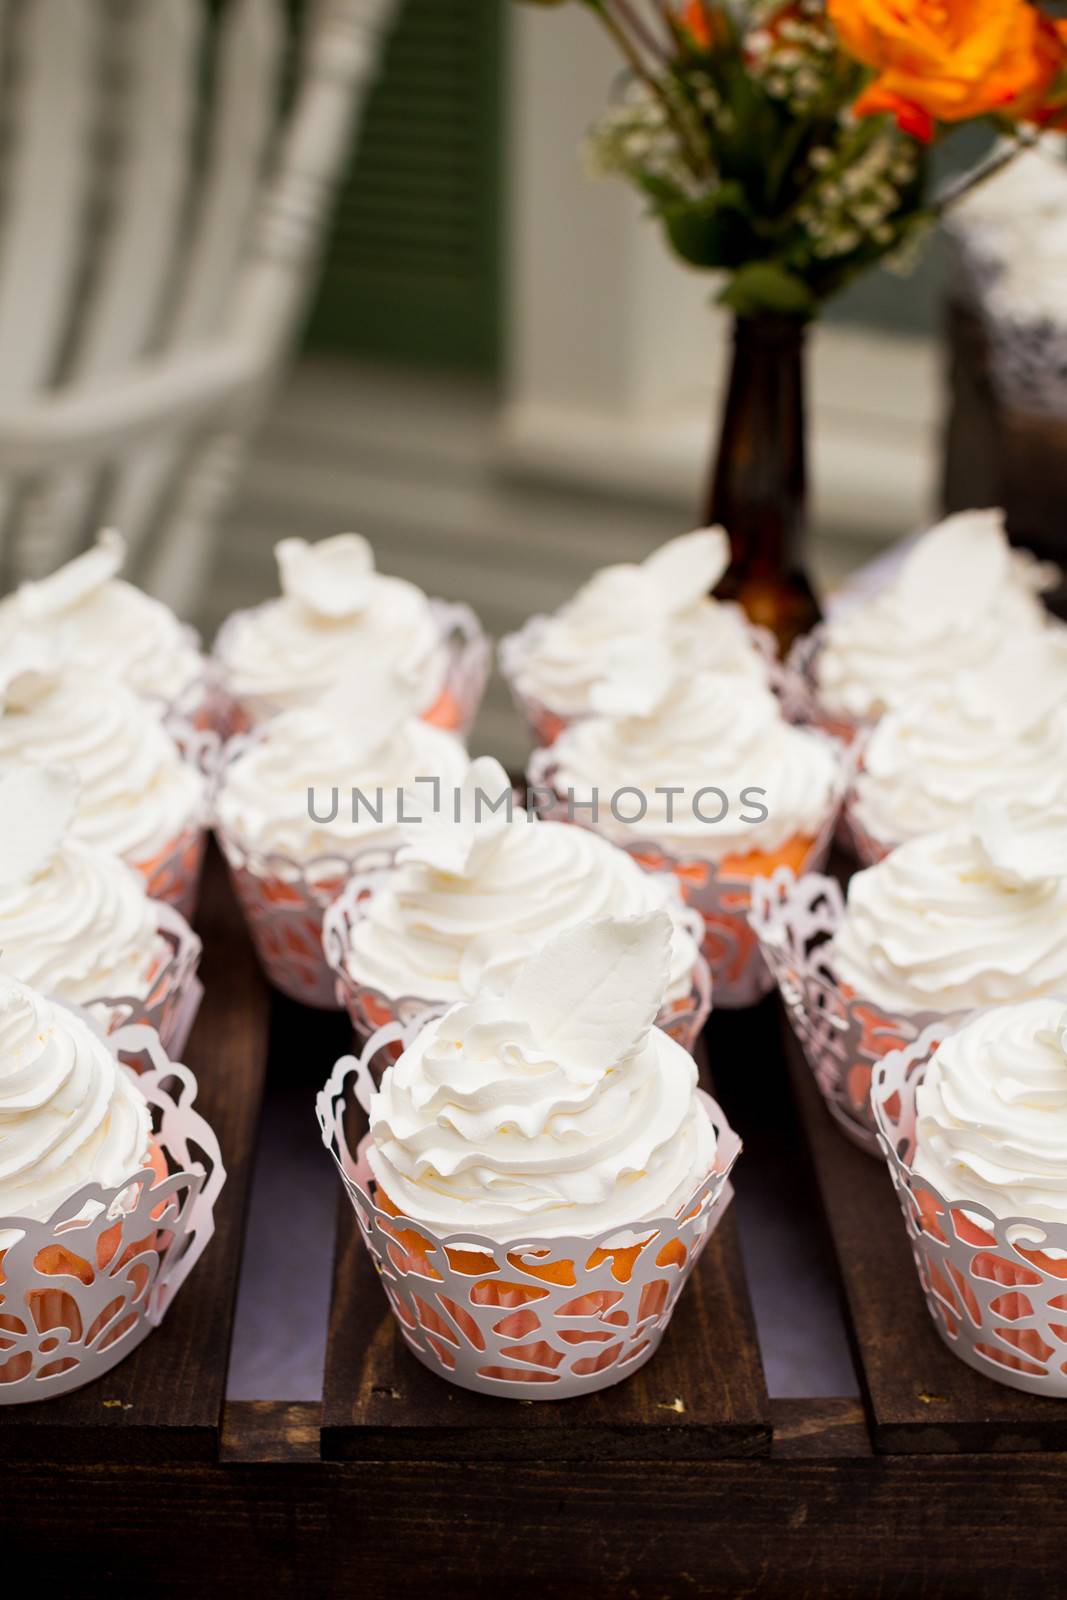 Wedding Cupcakes at Reception by joshuaraineyphotography